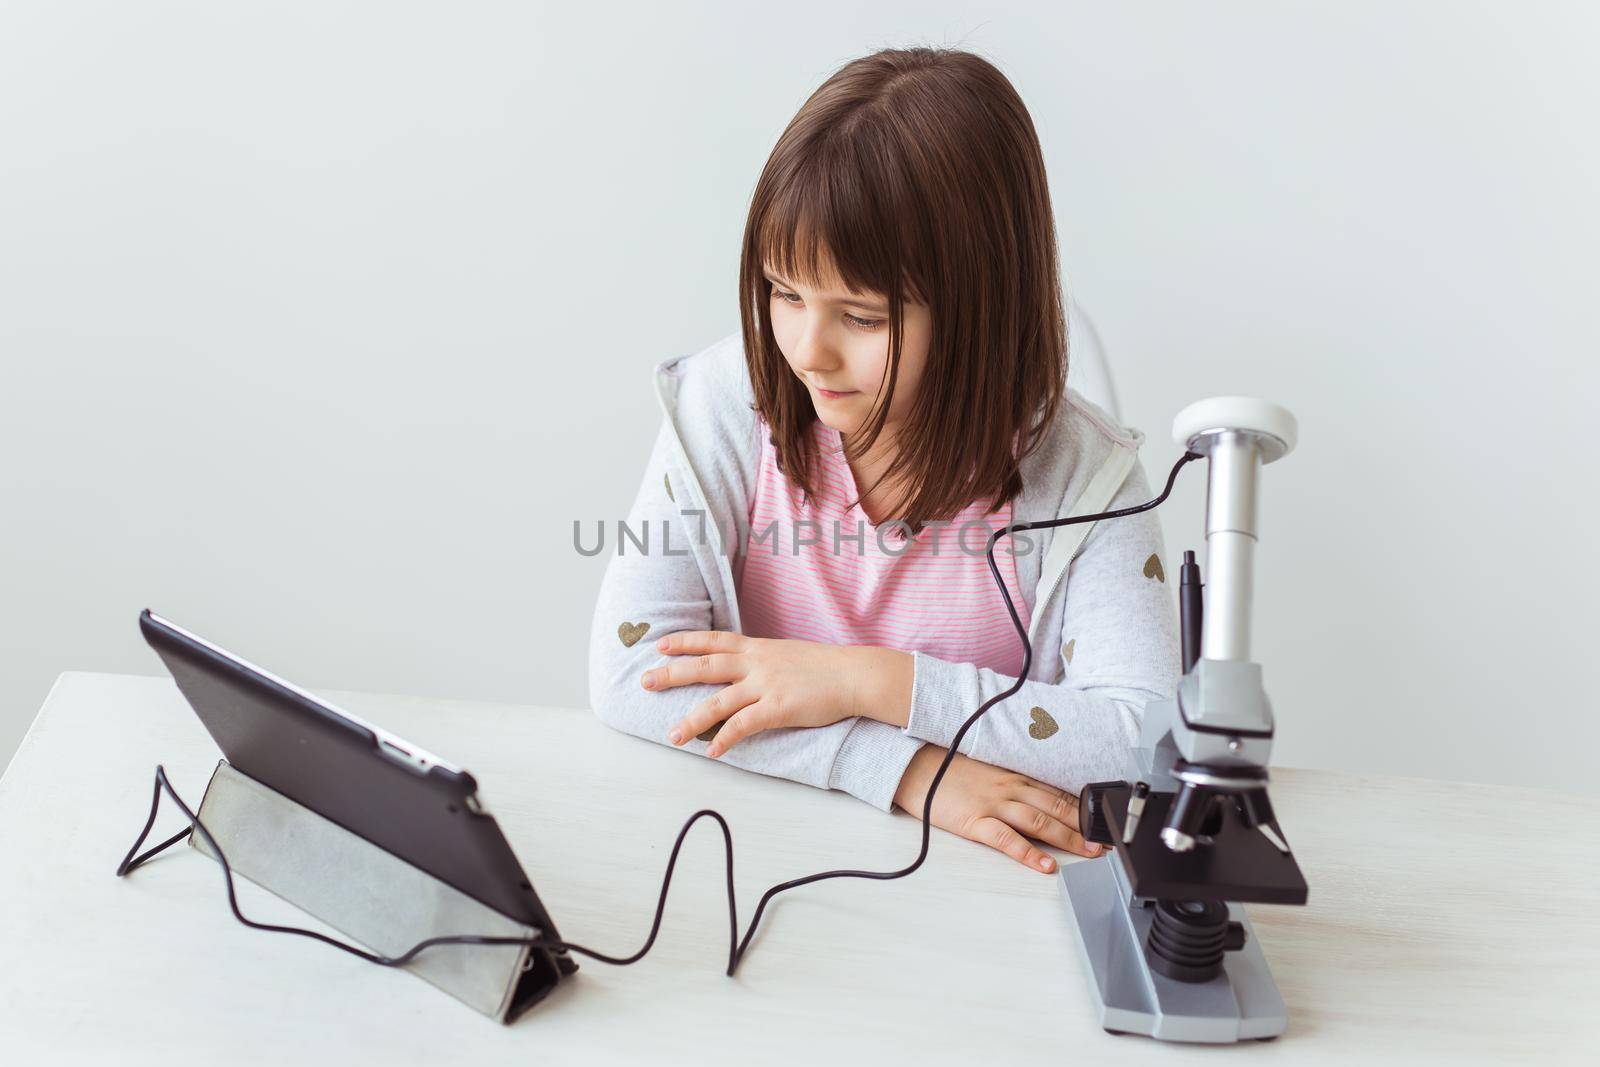 Schoolgirl using microscope in science class. Technologies, lessons and children concept. by Satura86